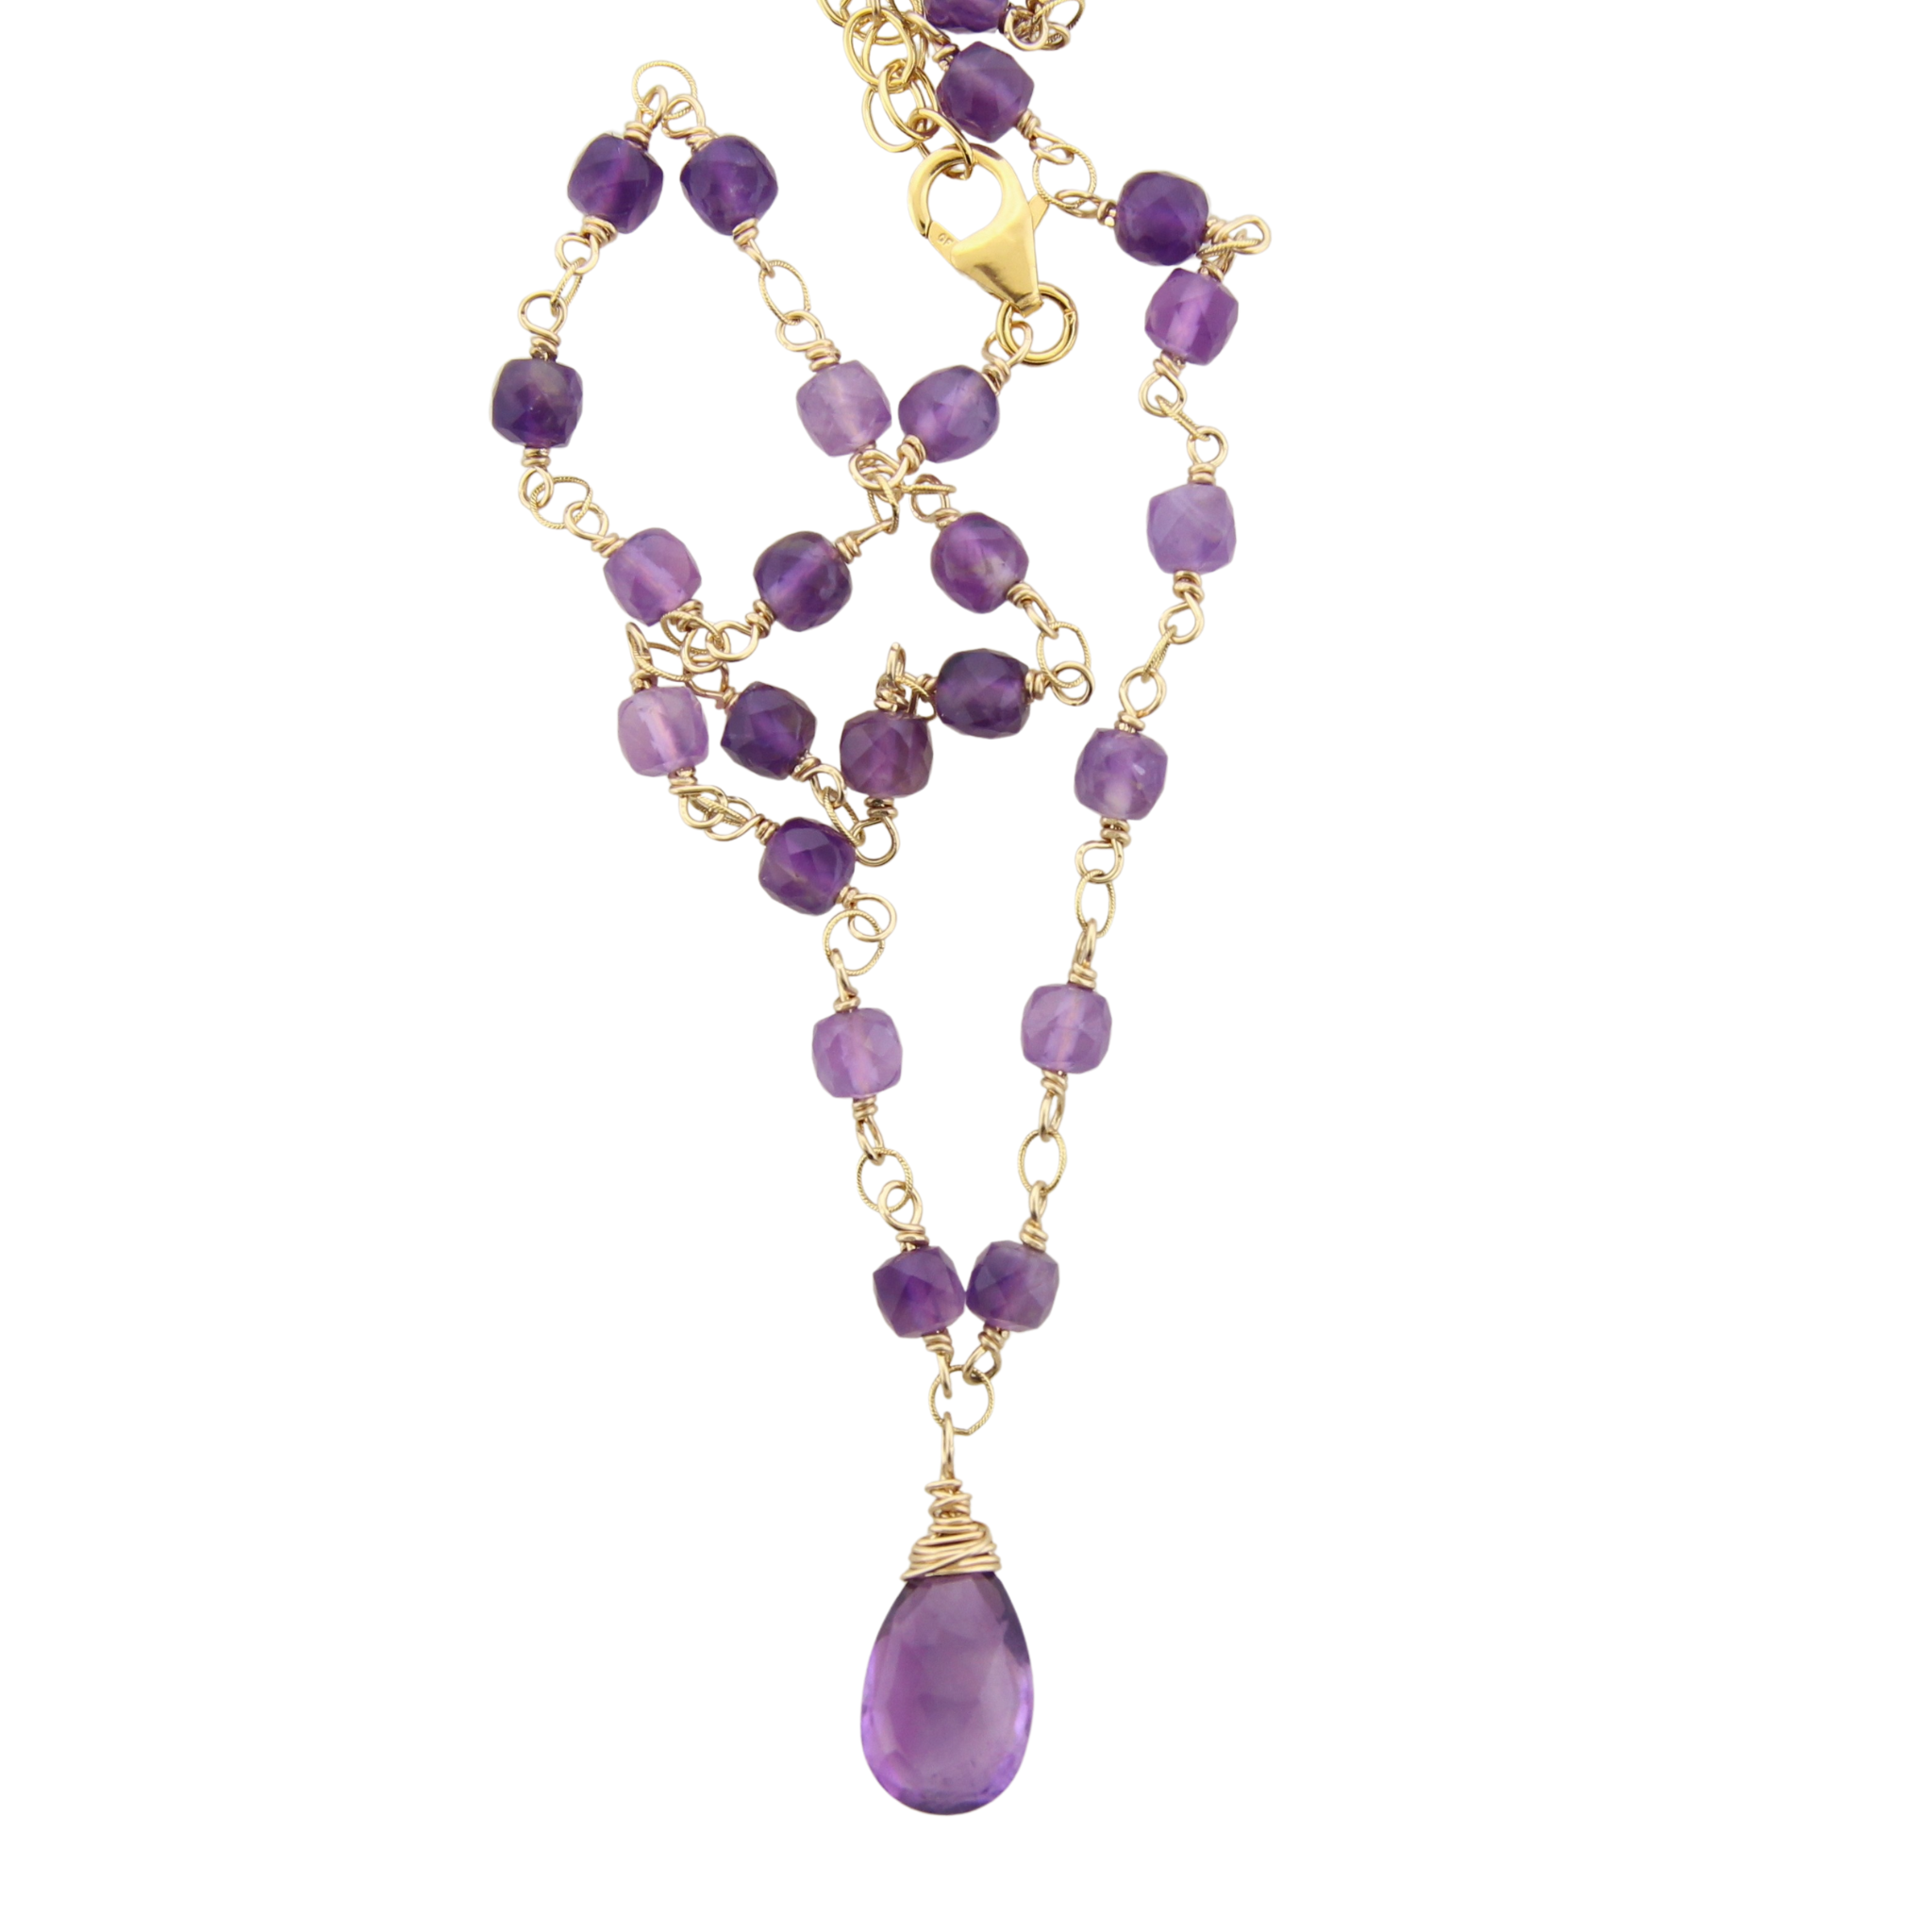 Whimsy Necklace - Amethyst